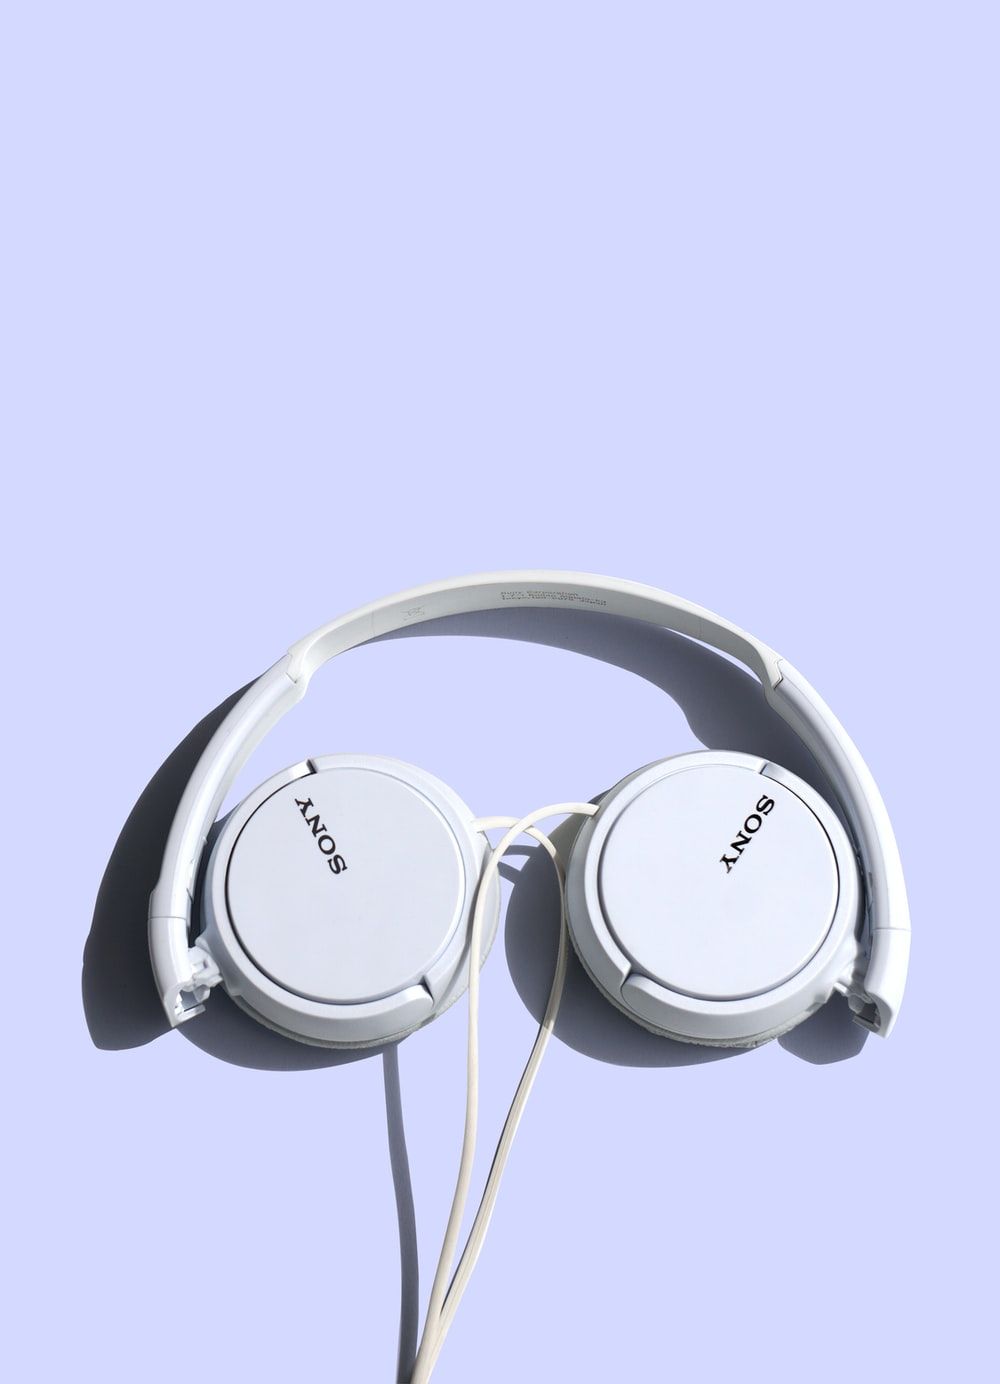 Headphone Picture. Download Free Image